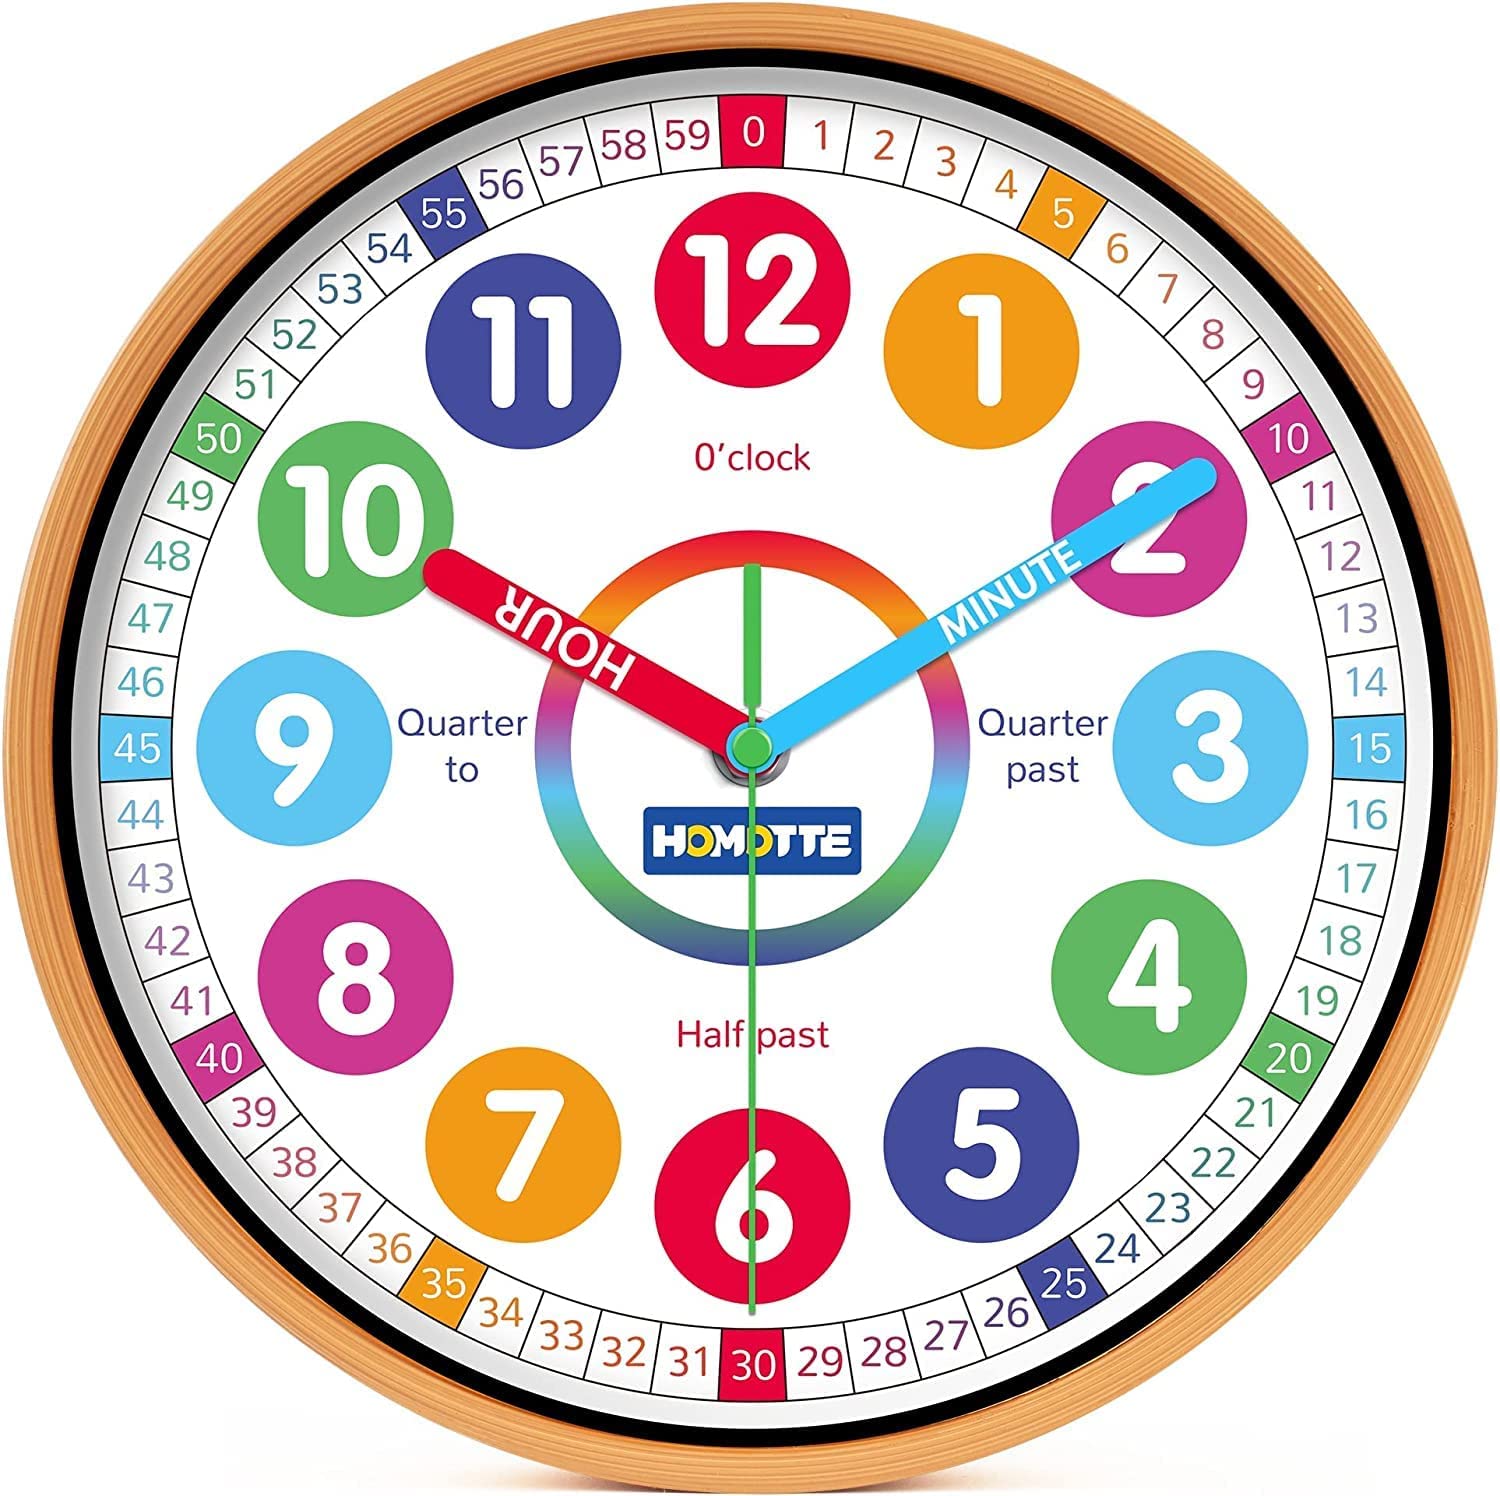 Homotte Kids Wall Clock for Bedroom, 10 inch Round Multi-Colored Learning Clock, Children's Silent Analog Non-Ticking Educational Wall Clock for Boys and Girls Classroom Home Decor - image 1 of 7